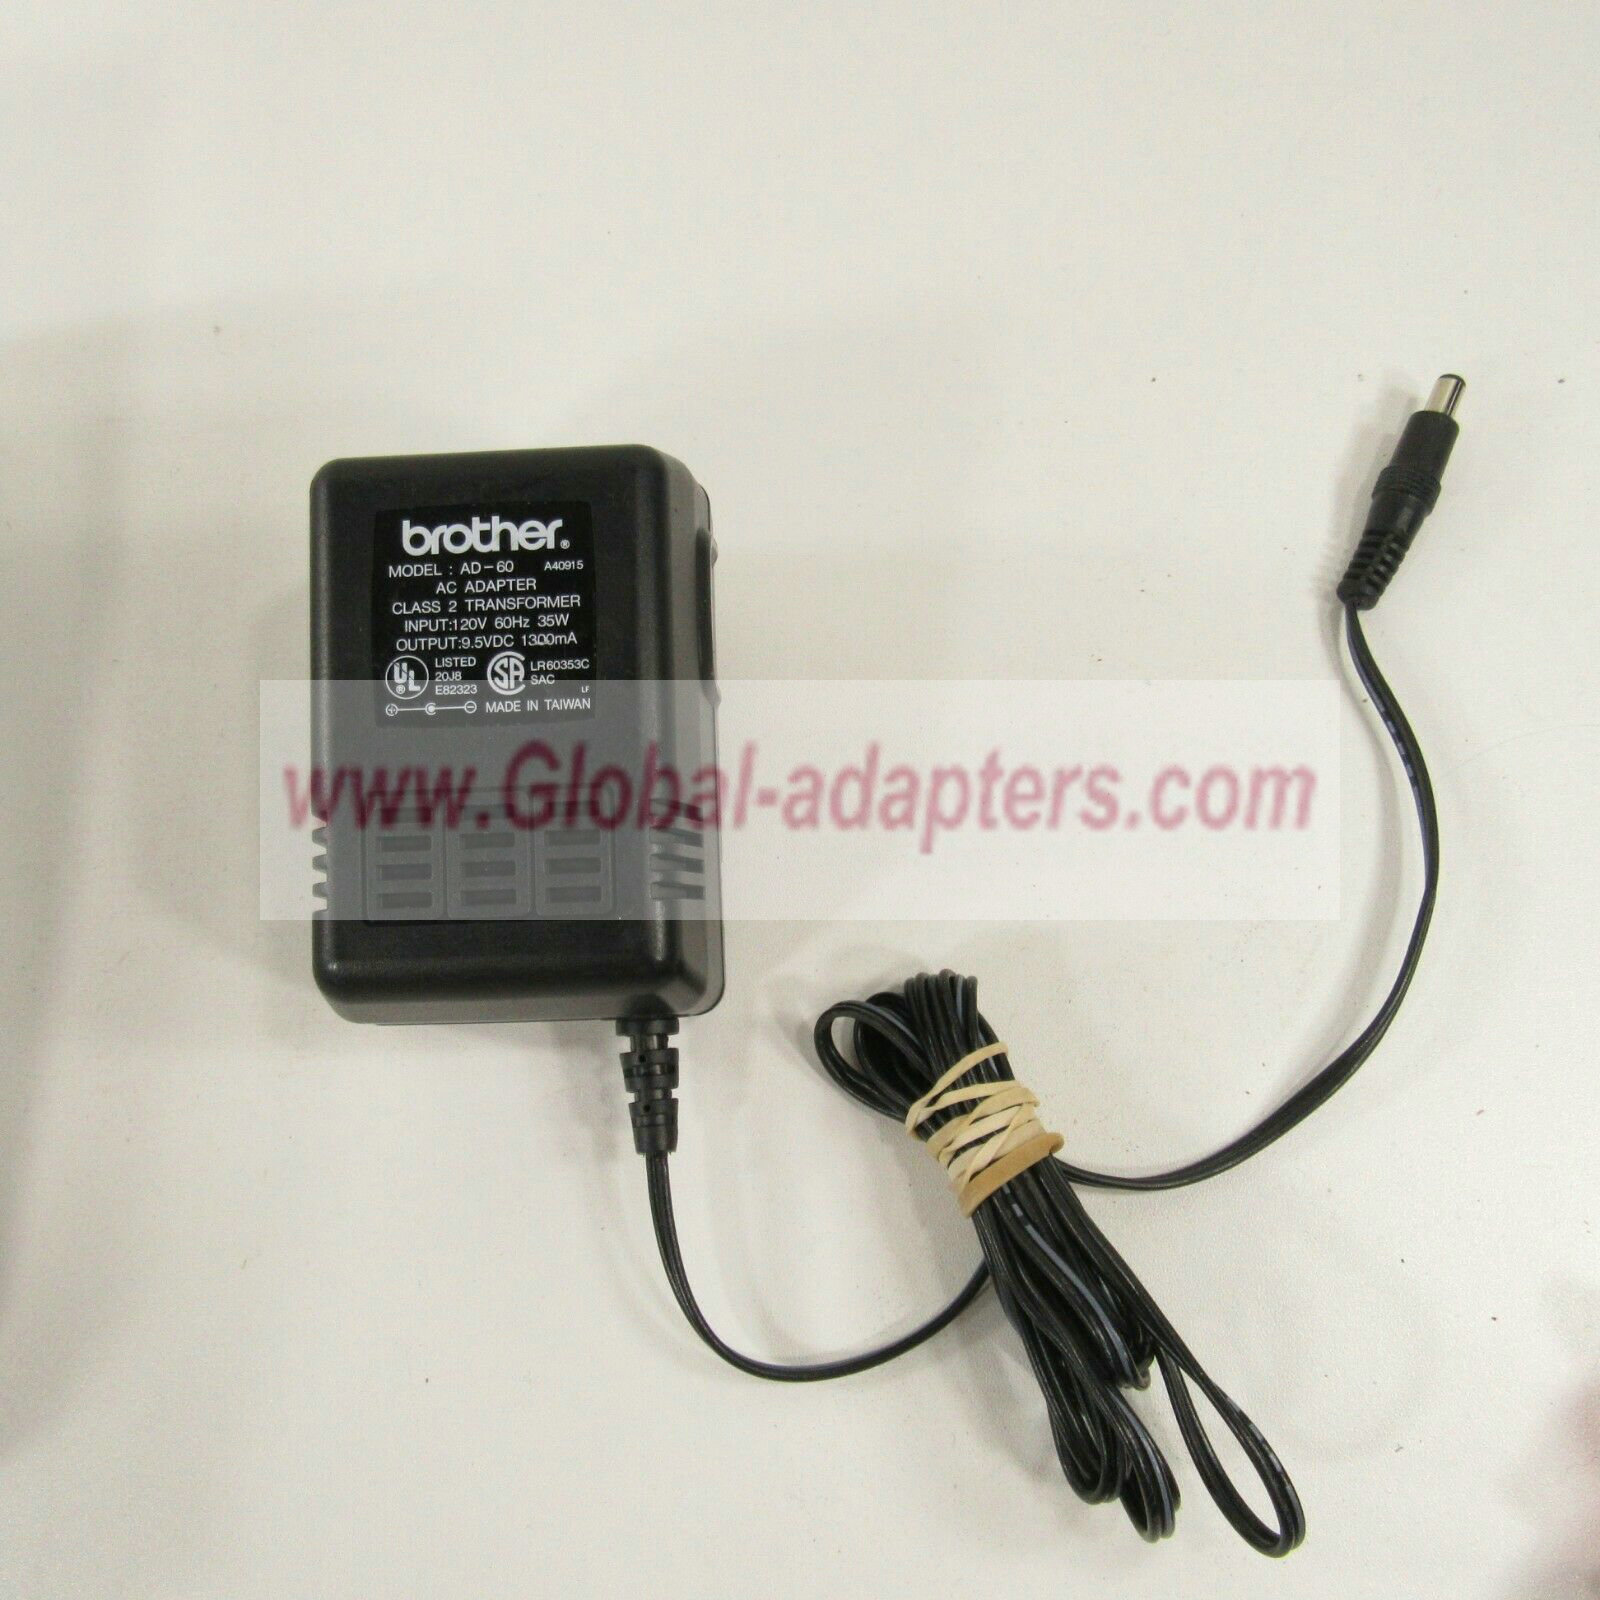 NEW 9.5V 1.3A Brother AD-60 AC Adapter